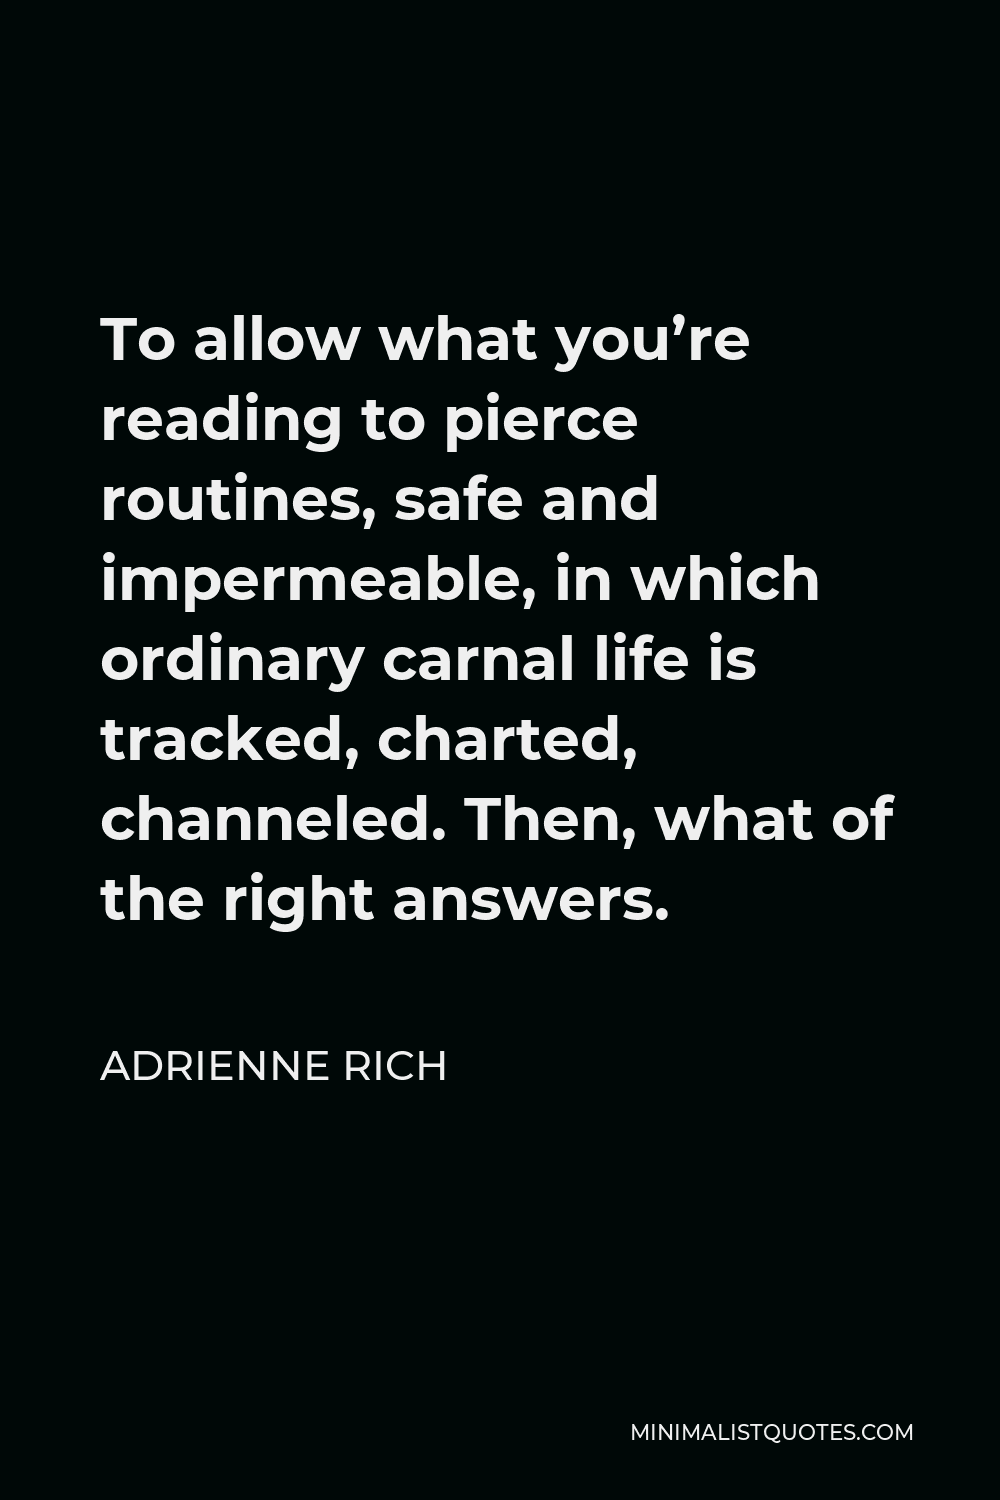 Adrienne Rich Quote - To allow what you’re reading to pierce routines, safe and impermeable, in which ordinary carnal life is tracked, charted, channeled. Then, what of the right answers.